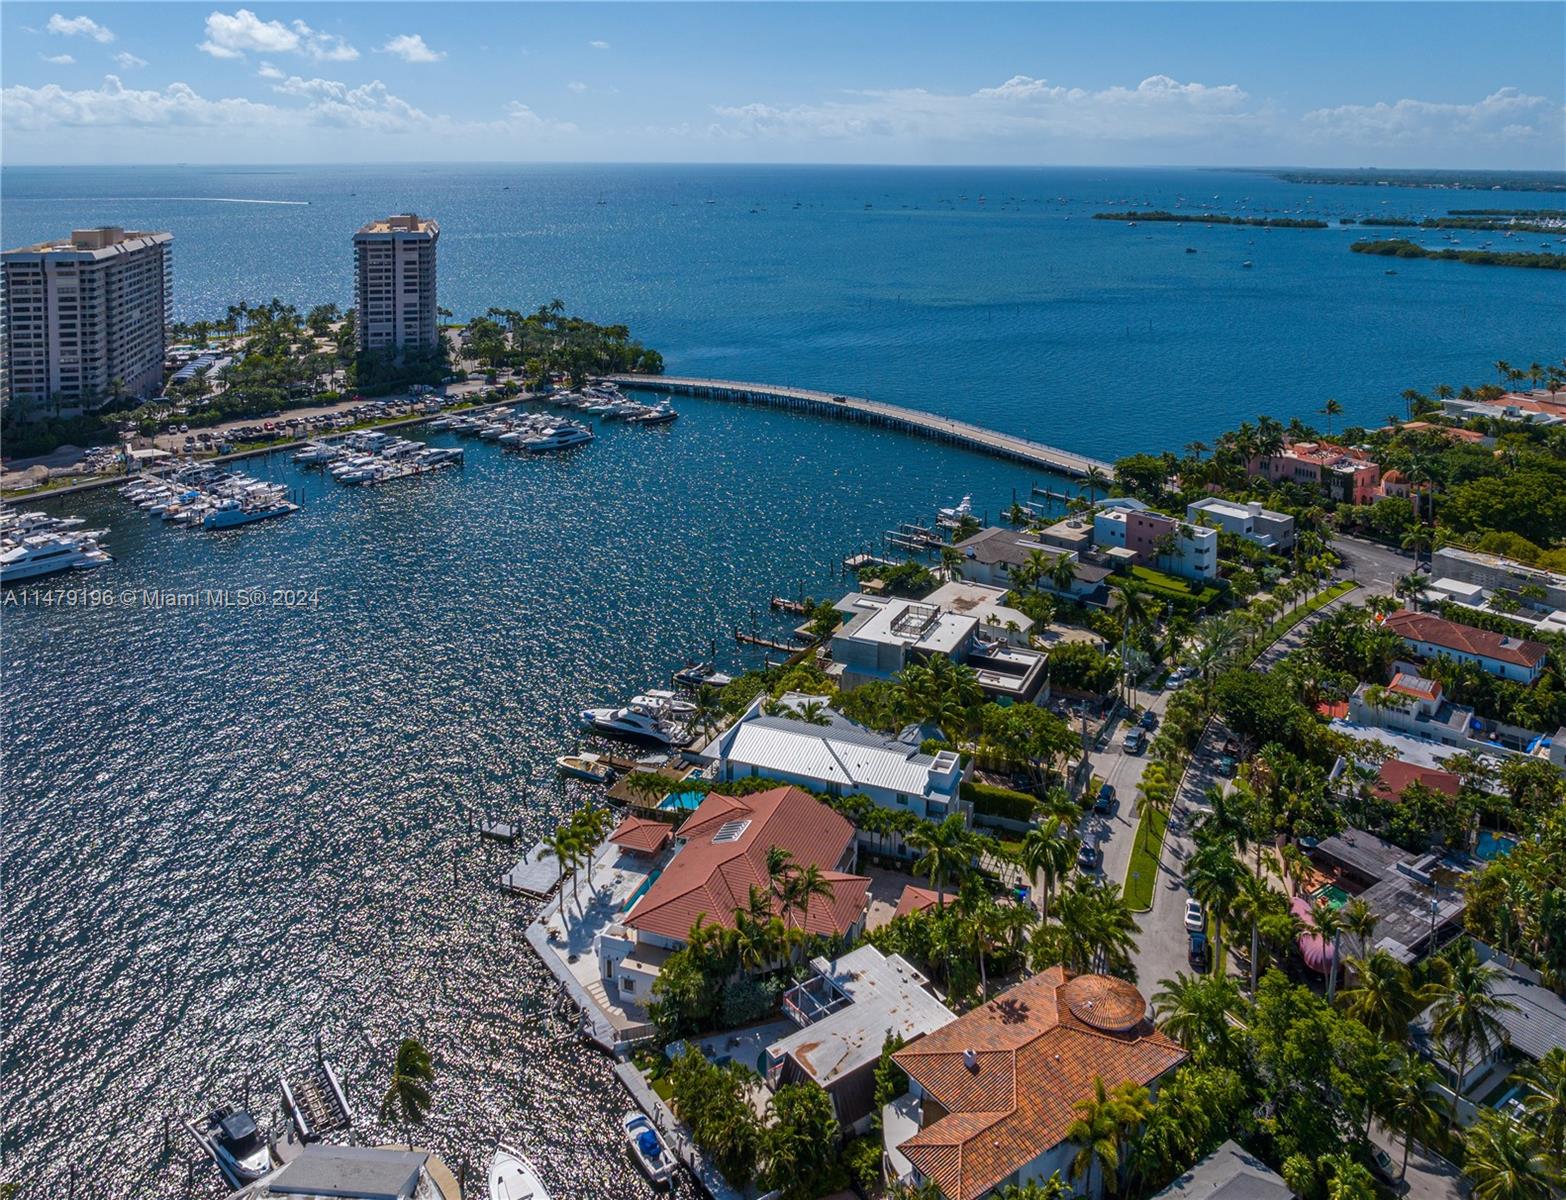 Bayfront - Coconut Grove with 139 ft of water frontage on a wide point lot w/rare substantive dockage. Price improved to $13,000,000 making this an exceptional value in one of Miami's prestigious areas. The existing home offers a canvas for updates or to embark on complete redevelopment. 8 BD, 10.5 BA, and a separate guest house. A-rated schools, tree-filled parks and bikeways, shopping, and numerous culinary restaurants. Tailor-made for water enthusiasts and boat lovers!